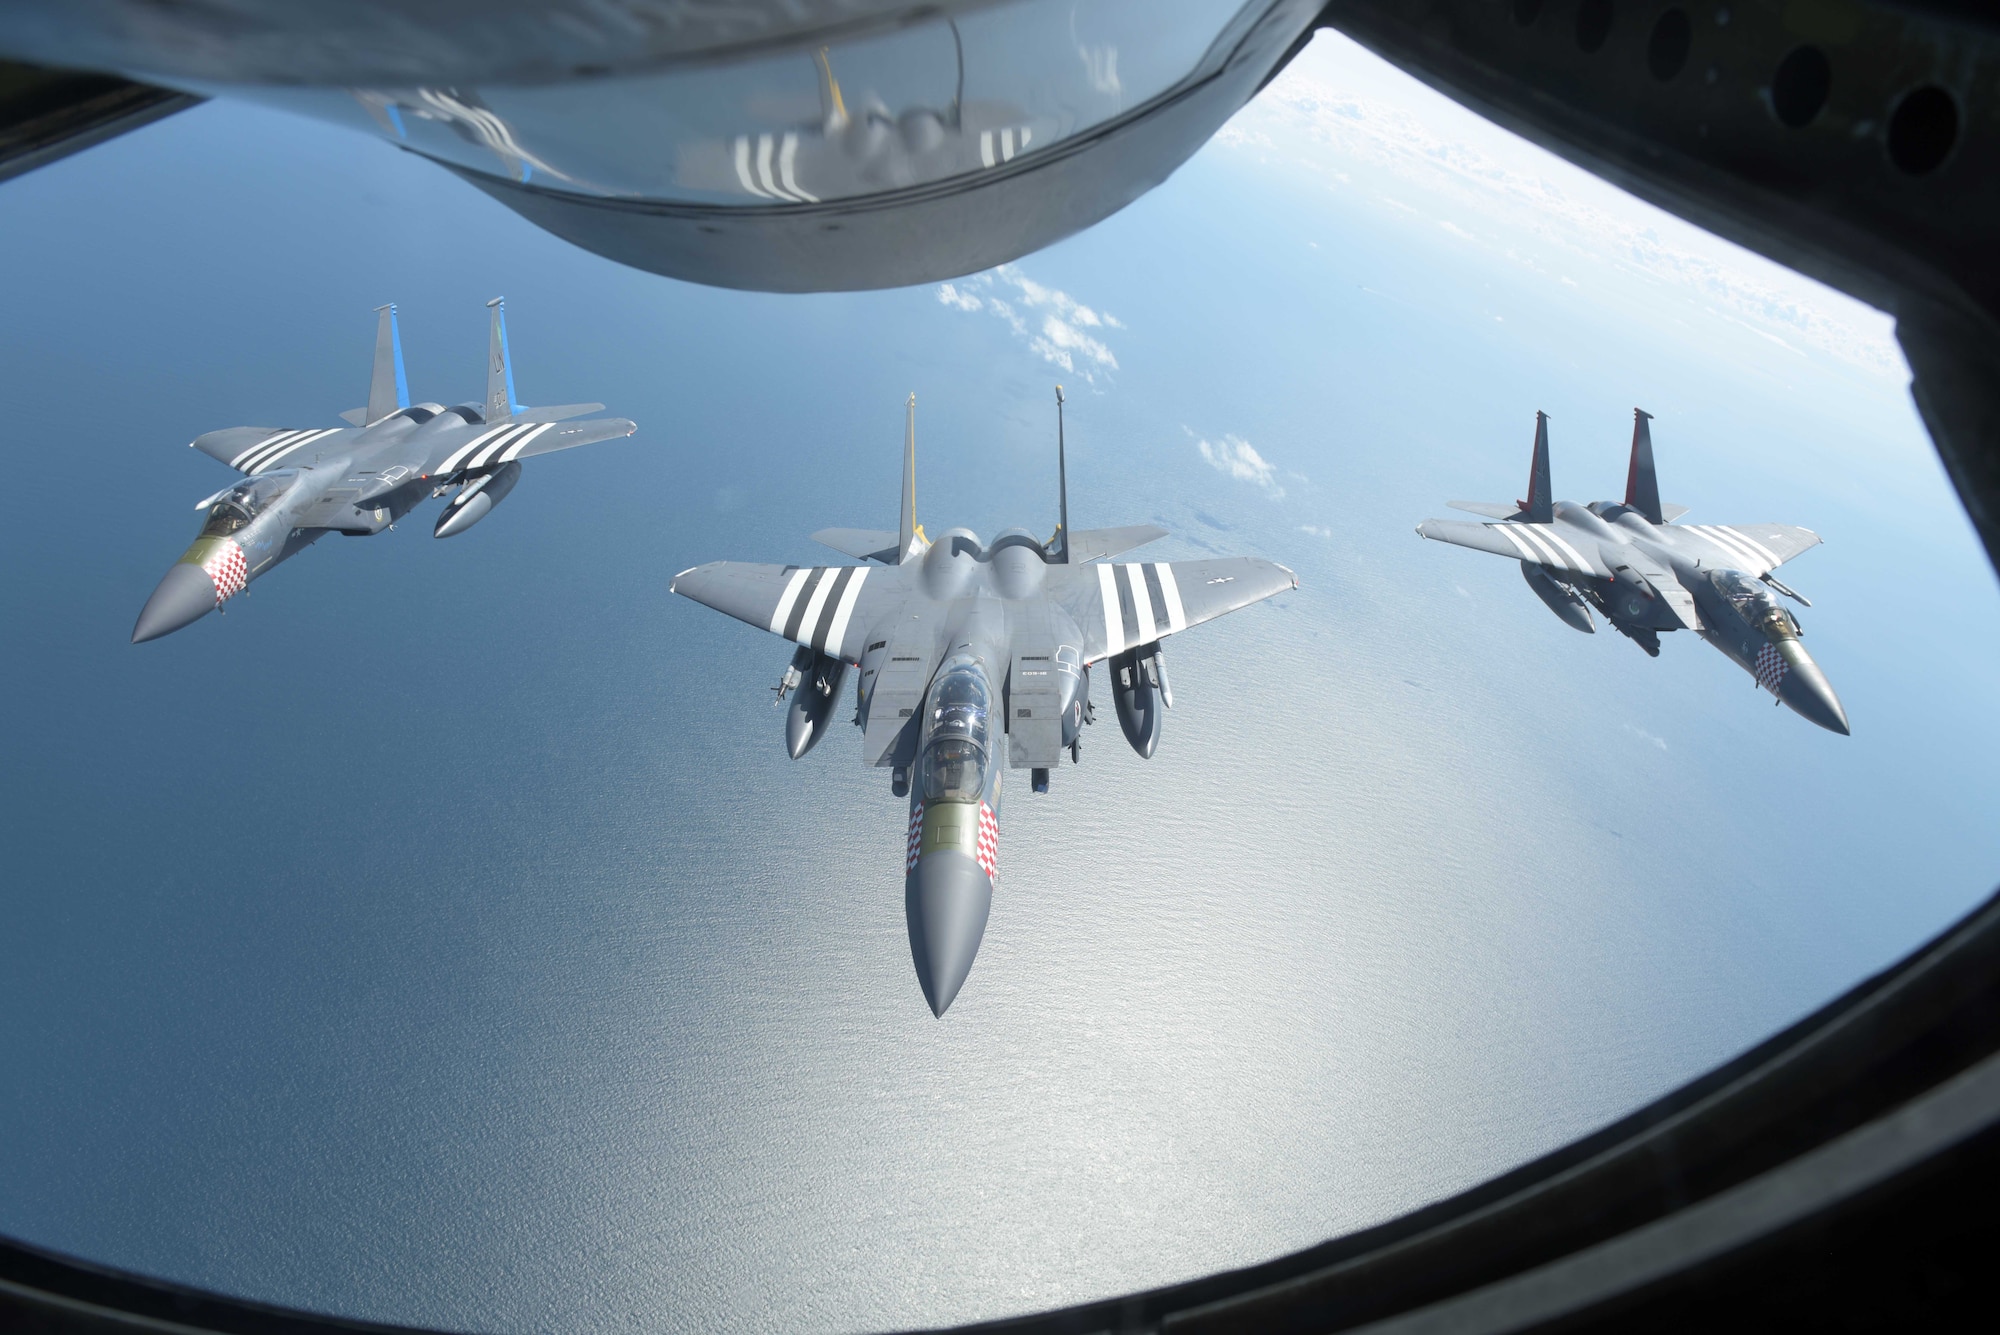 Three U.S. Air Force F-15s, assigned to the 48th Fighter Squadron at RAF Lakenheath, England, fly in formation behind a U.S. Air Force KC-135 Stratotanker off the Southern coast of England, June 6, 2019. The F-15s were painted with heritage markings in honor of the 75th anniversary of D-Day. As we commemorate D-Day 75, U.S. forces in Europe remain committed to collective defense and cooperative security alongside European allies and partners. (U.S. Air Force photo by Senior Airman Benjamin Cooper)